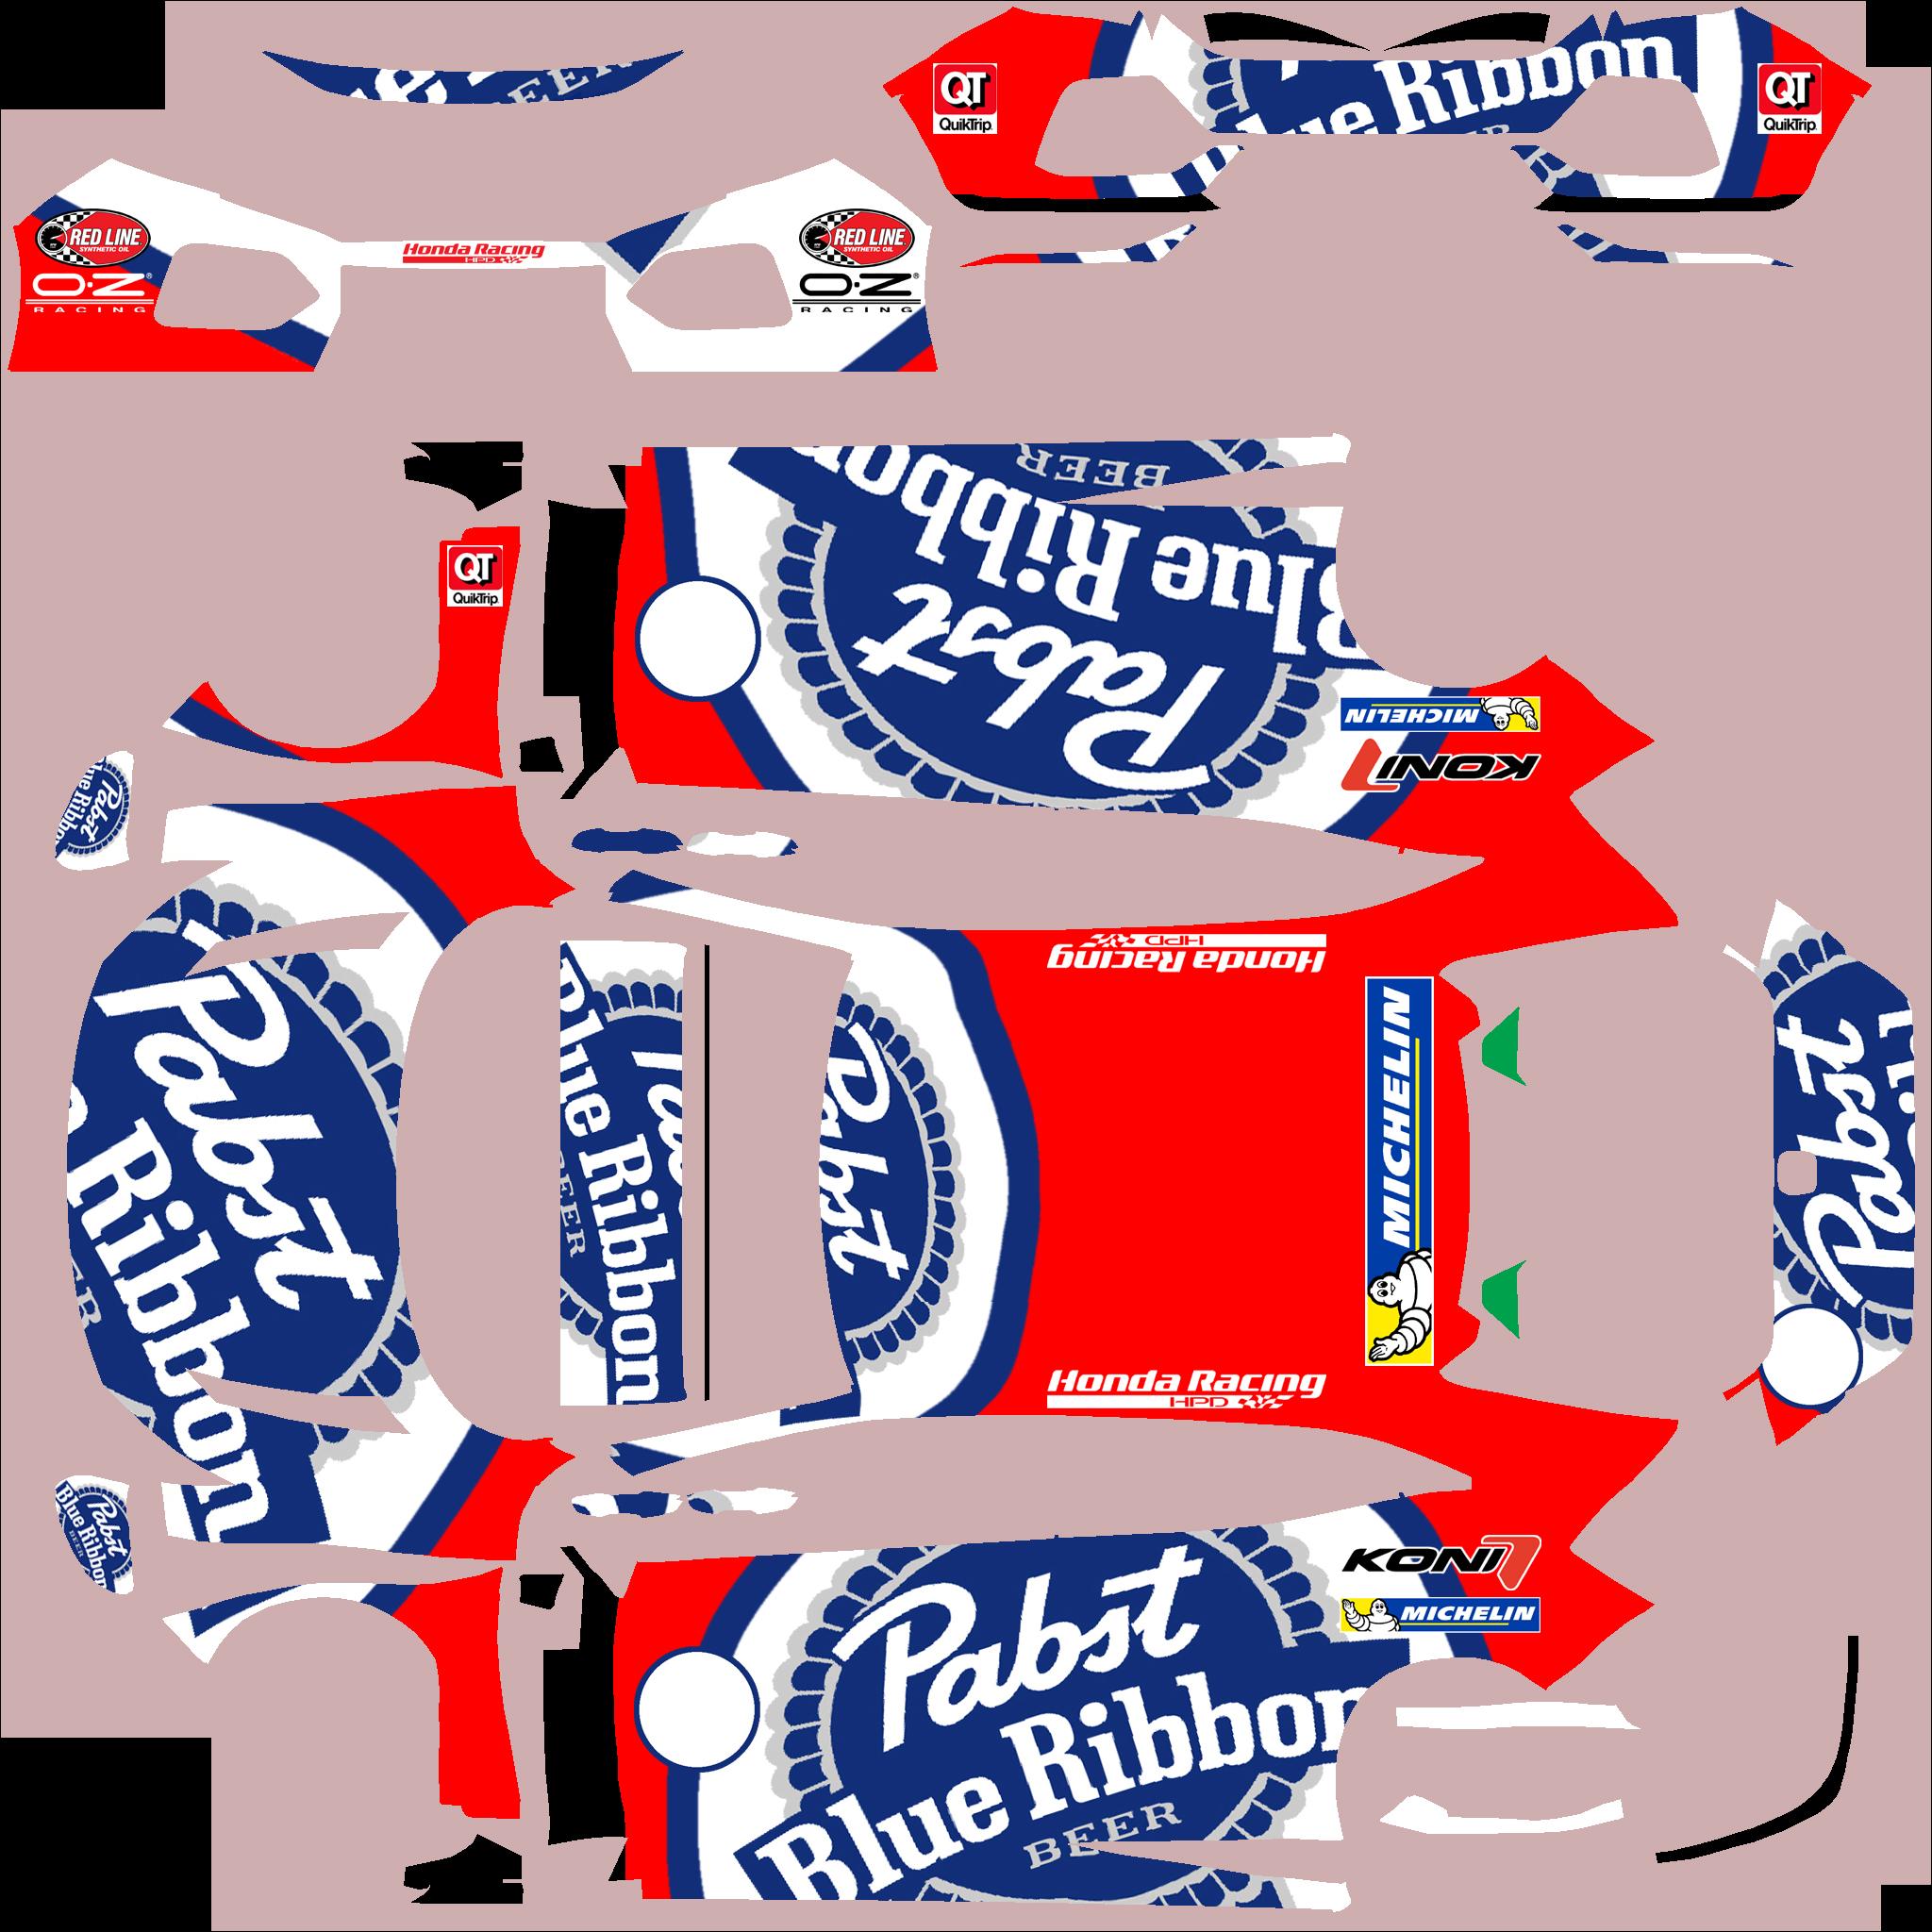 Honda Civic TCR Pabst by Clyde Coman - Trading Paints